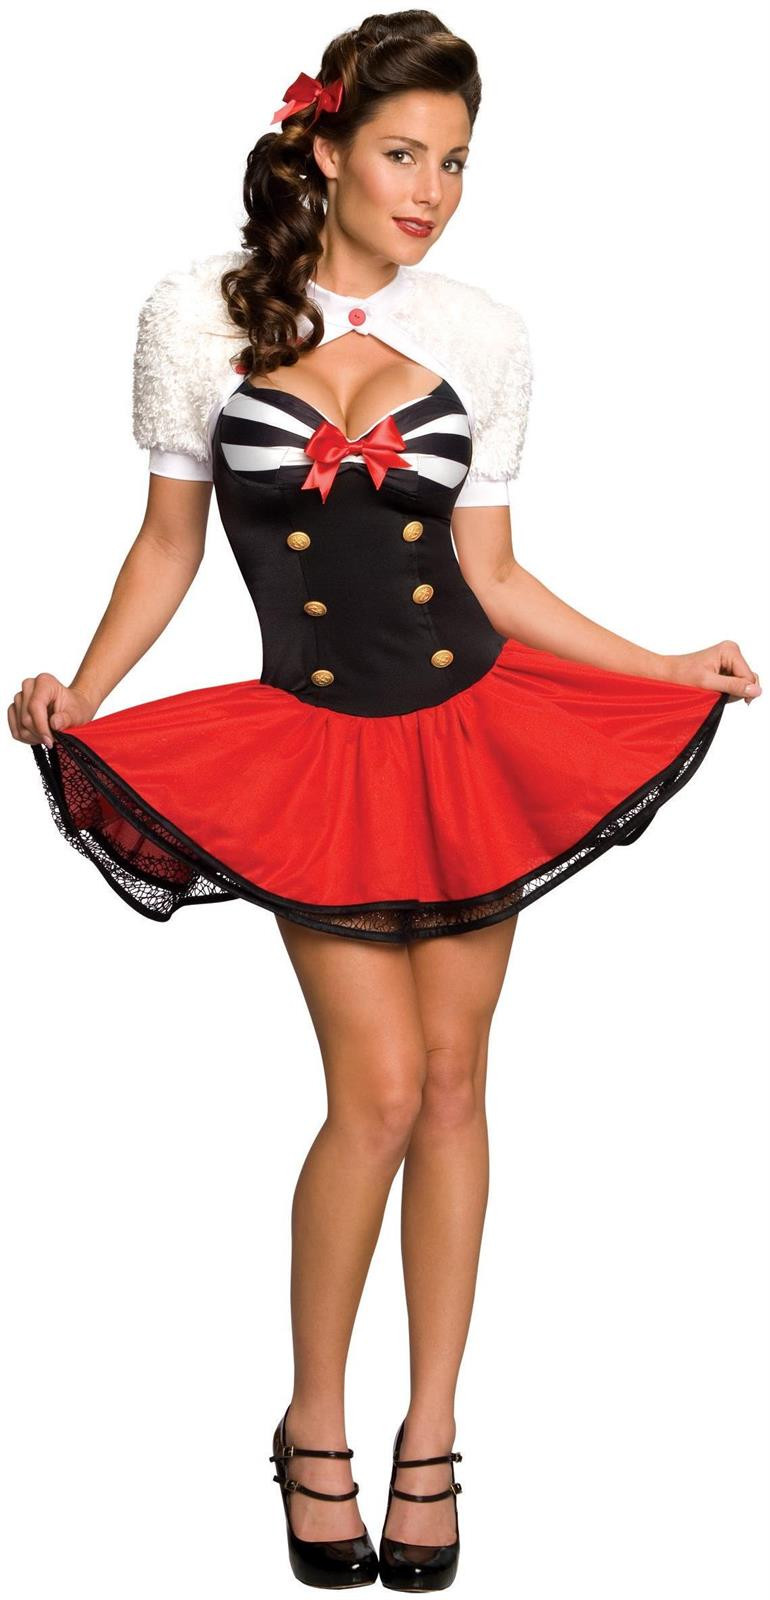 Pins Outfit
 Secret Wishes Naval Pinup Adult Costume SpicyLegs